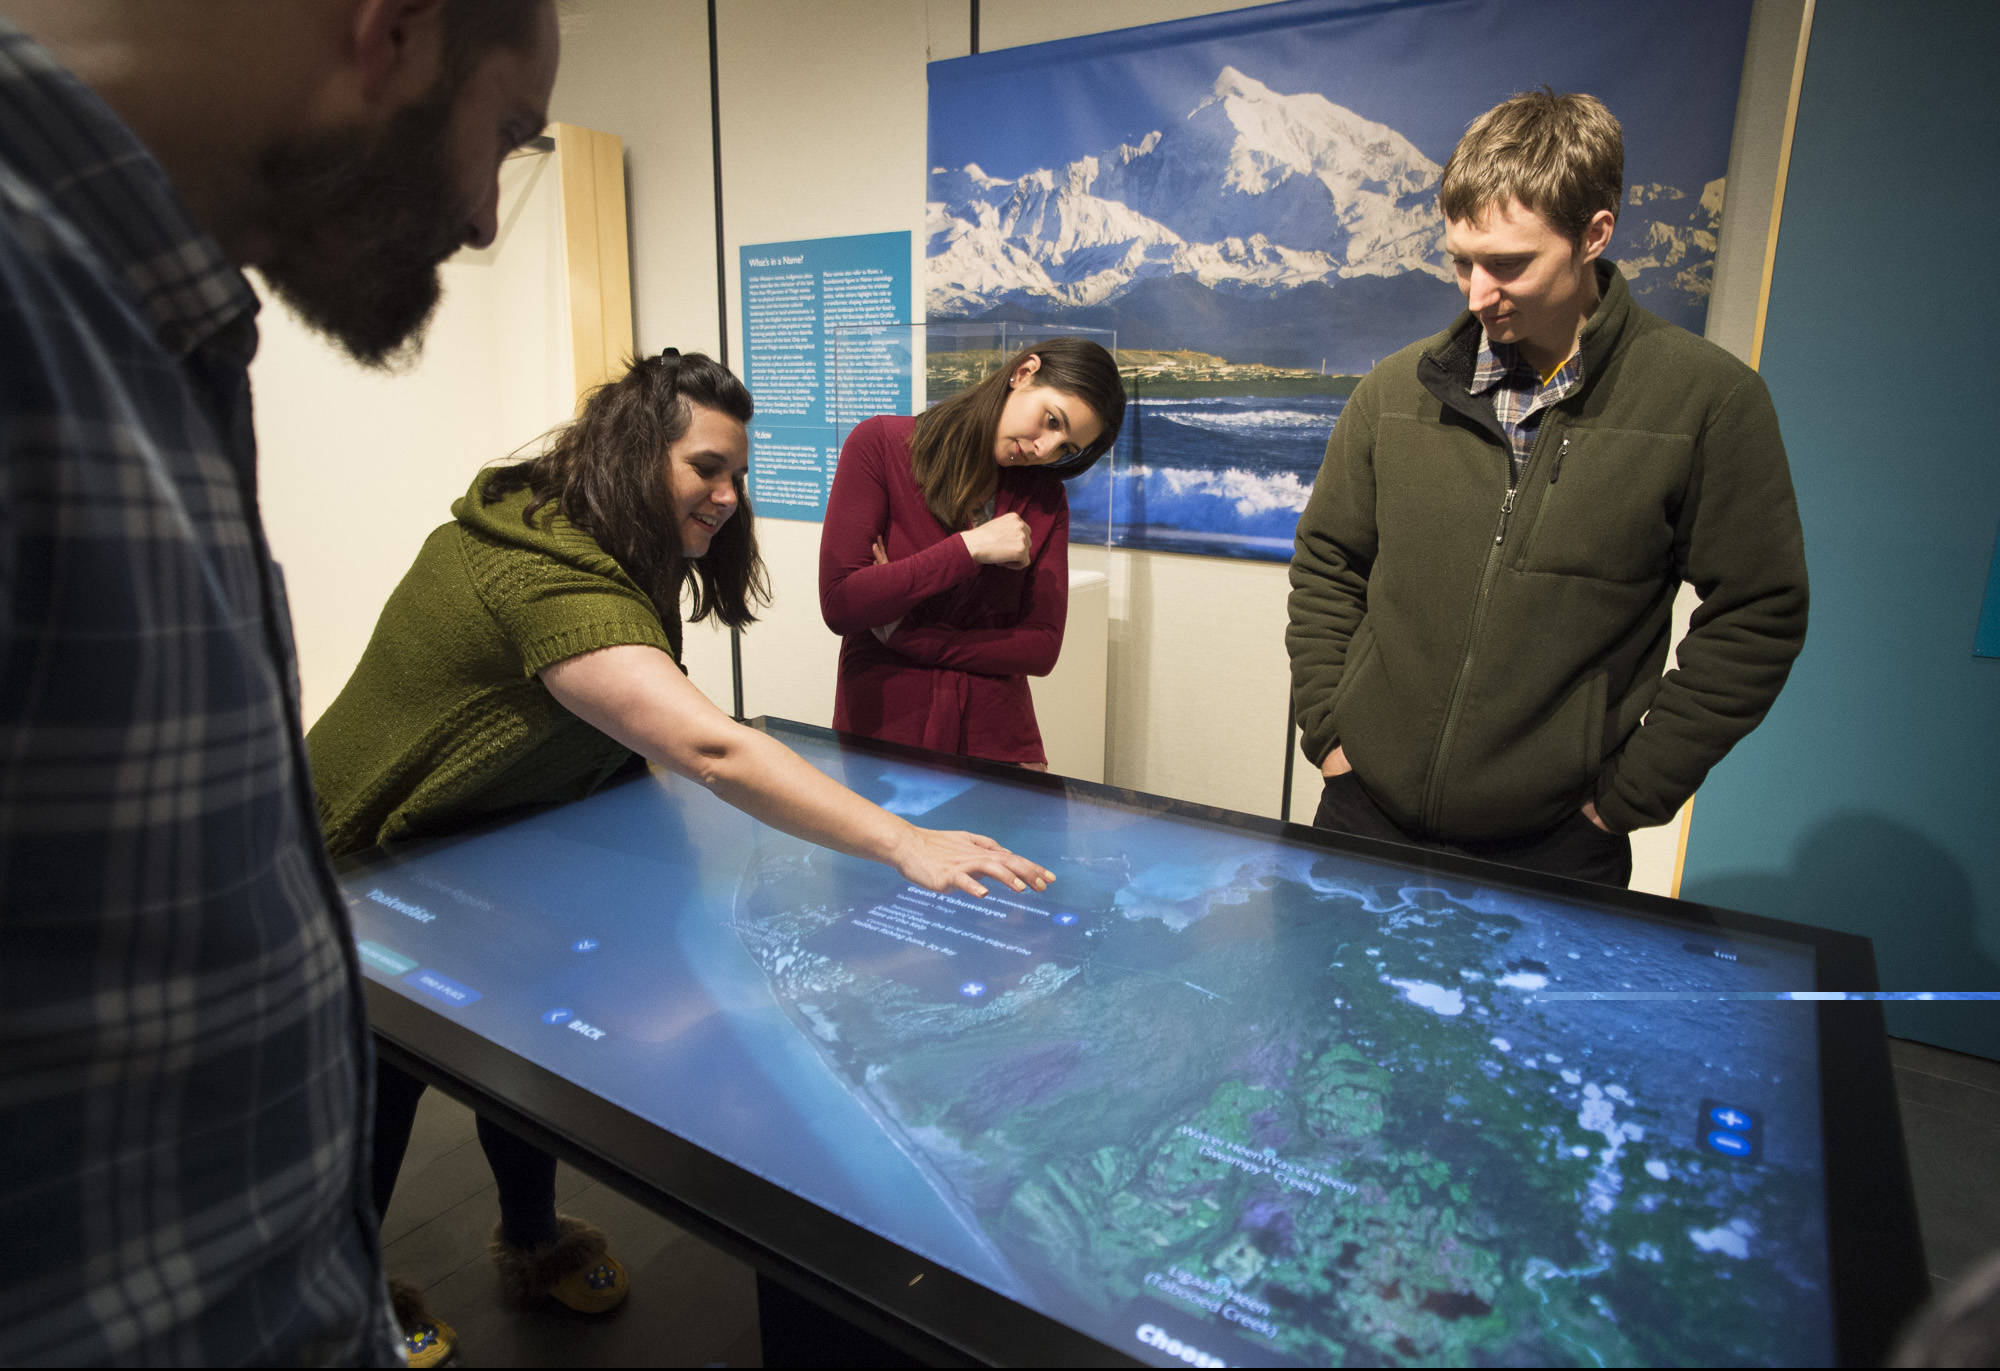 Sealaska Heritage Institute employees Mason Auger, left, Bobbie Meszaros, Jill Meserve and Will Geiger, right, explore a new interactive exhibit, “Our Grandparents’ Names on the Land,” in the Nathan Jackson Gallery in SHI’s Walter Soboleff Building on Thursday, April 26, 2018. The exhibit explores ancient place names and the innovative inventions that were used to catch halibut and salmon. The community is welcome to explore it free of charge on First Friday. (Michael Penn | Juneau Empire)